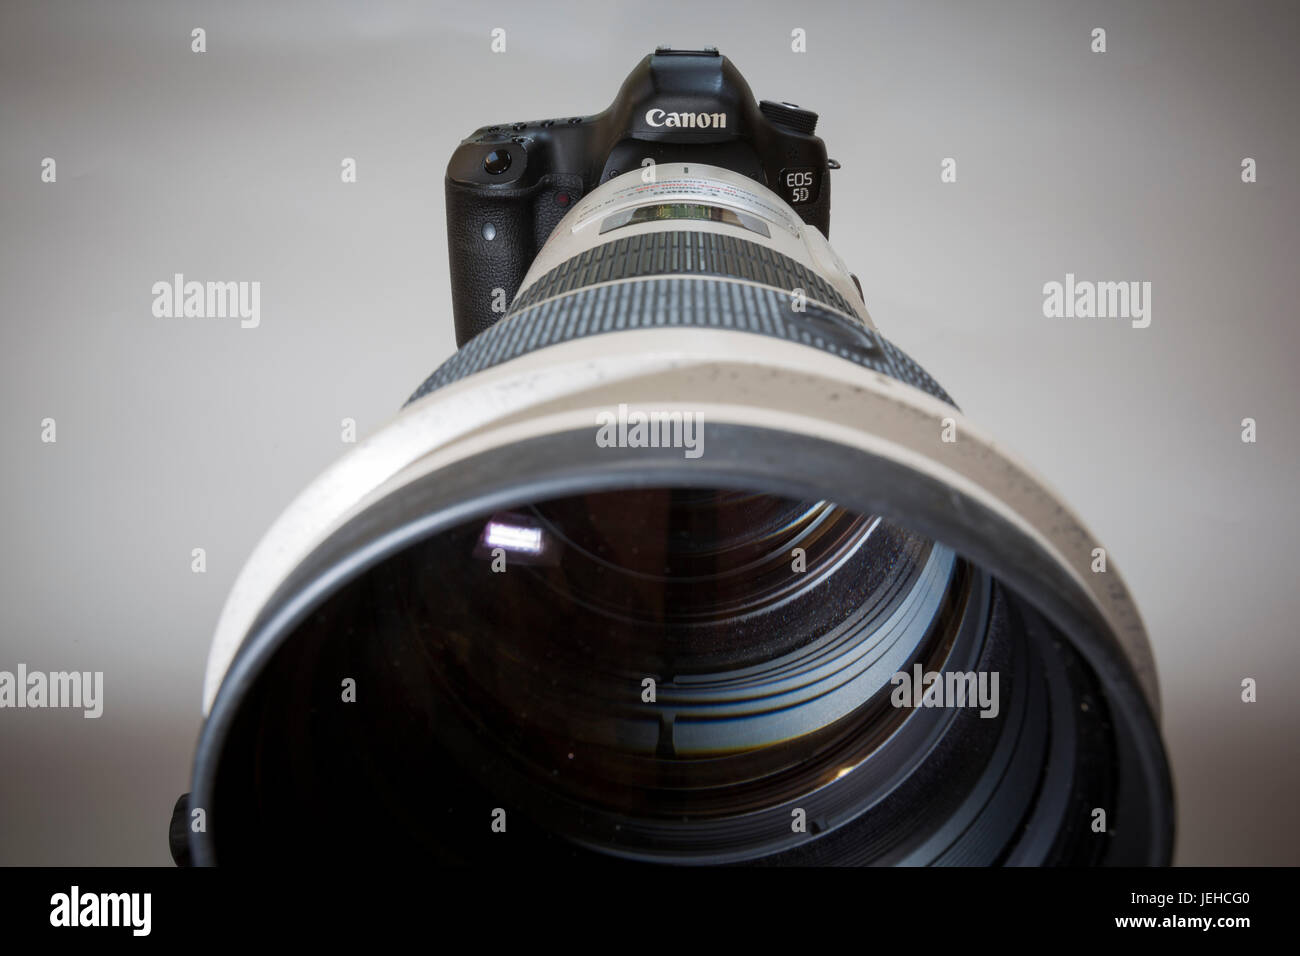 A telephoto lens on a camera. 300mm F2.8 lens on a Canon 5D111 DSLR body. Stock Photo